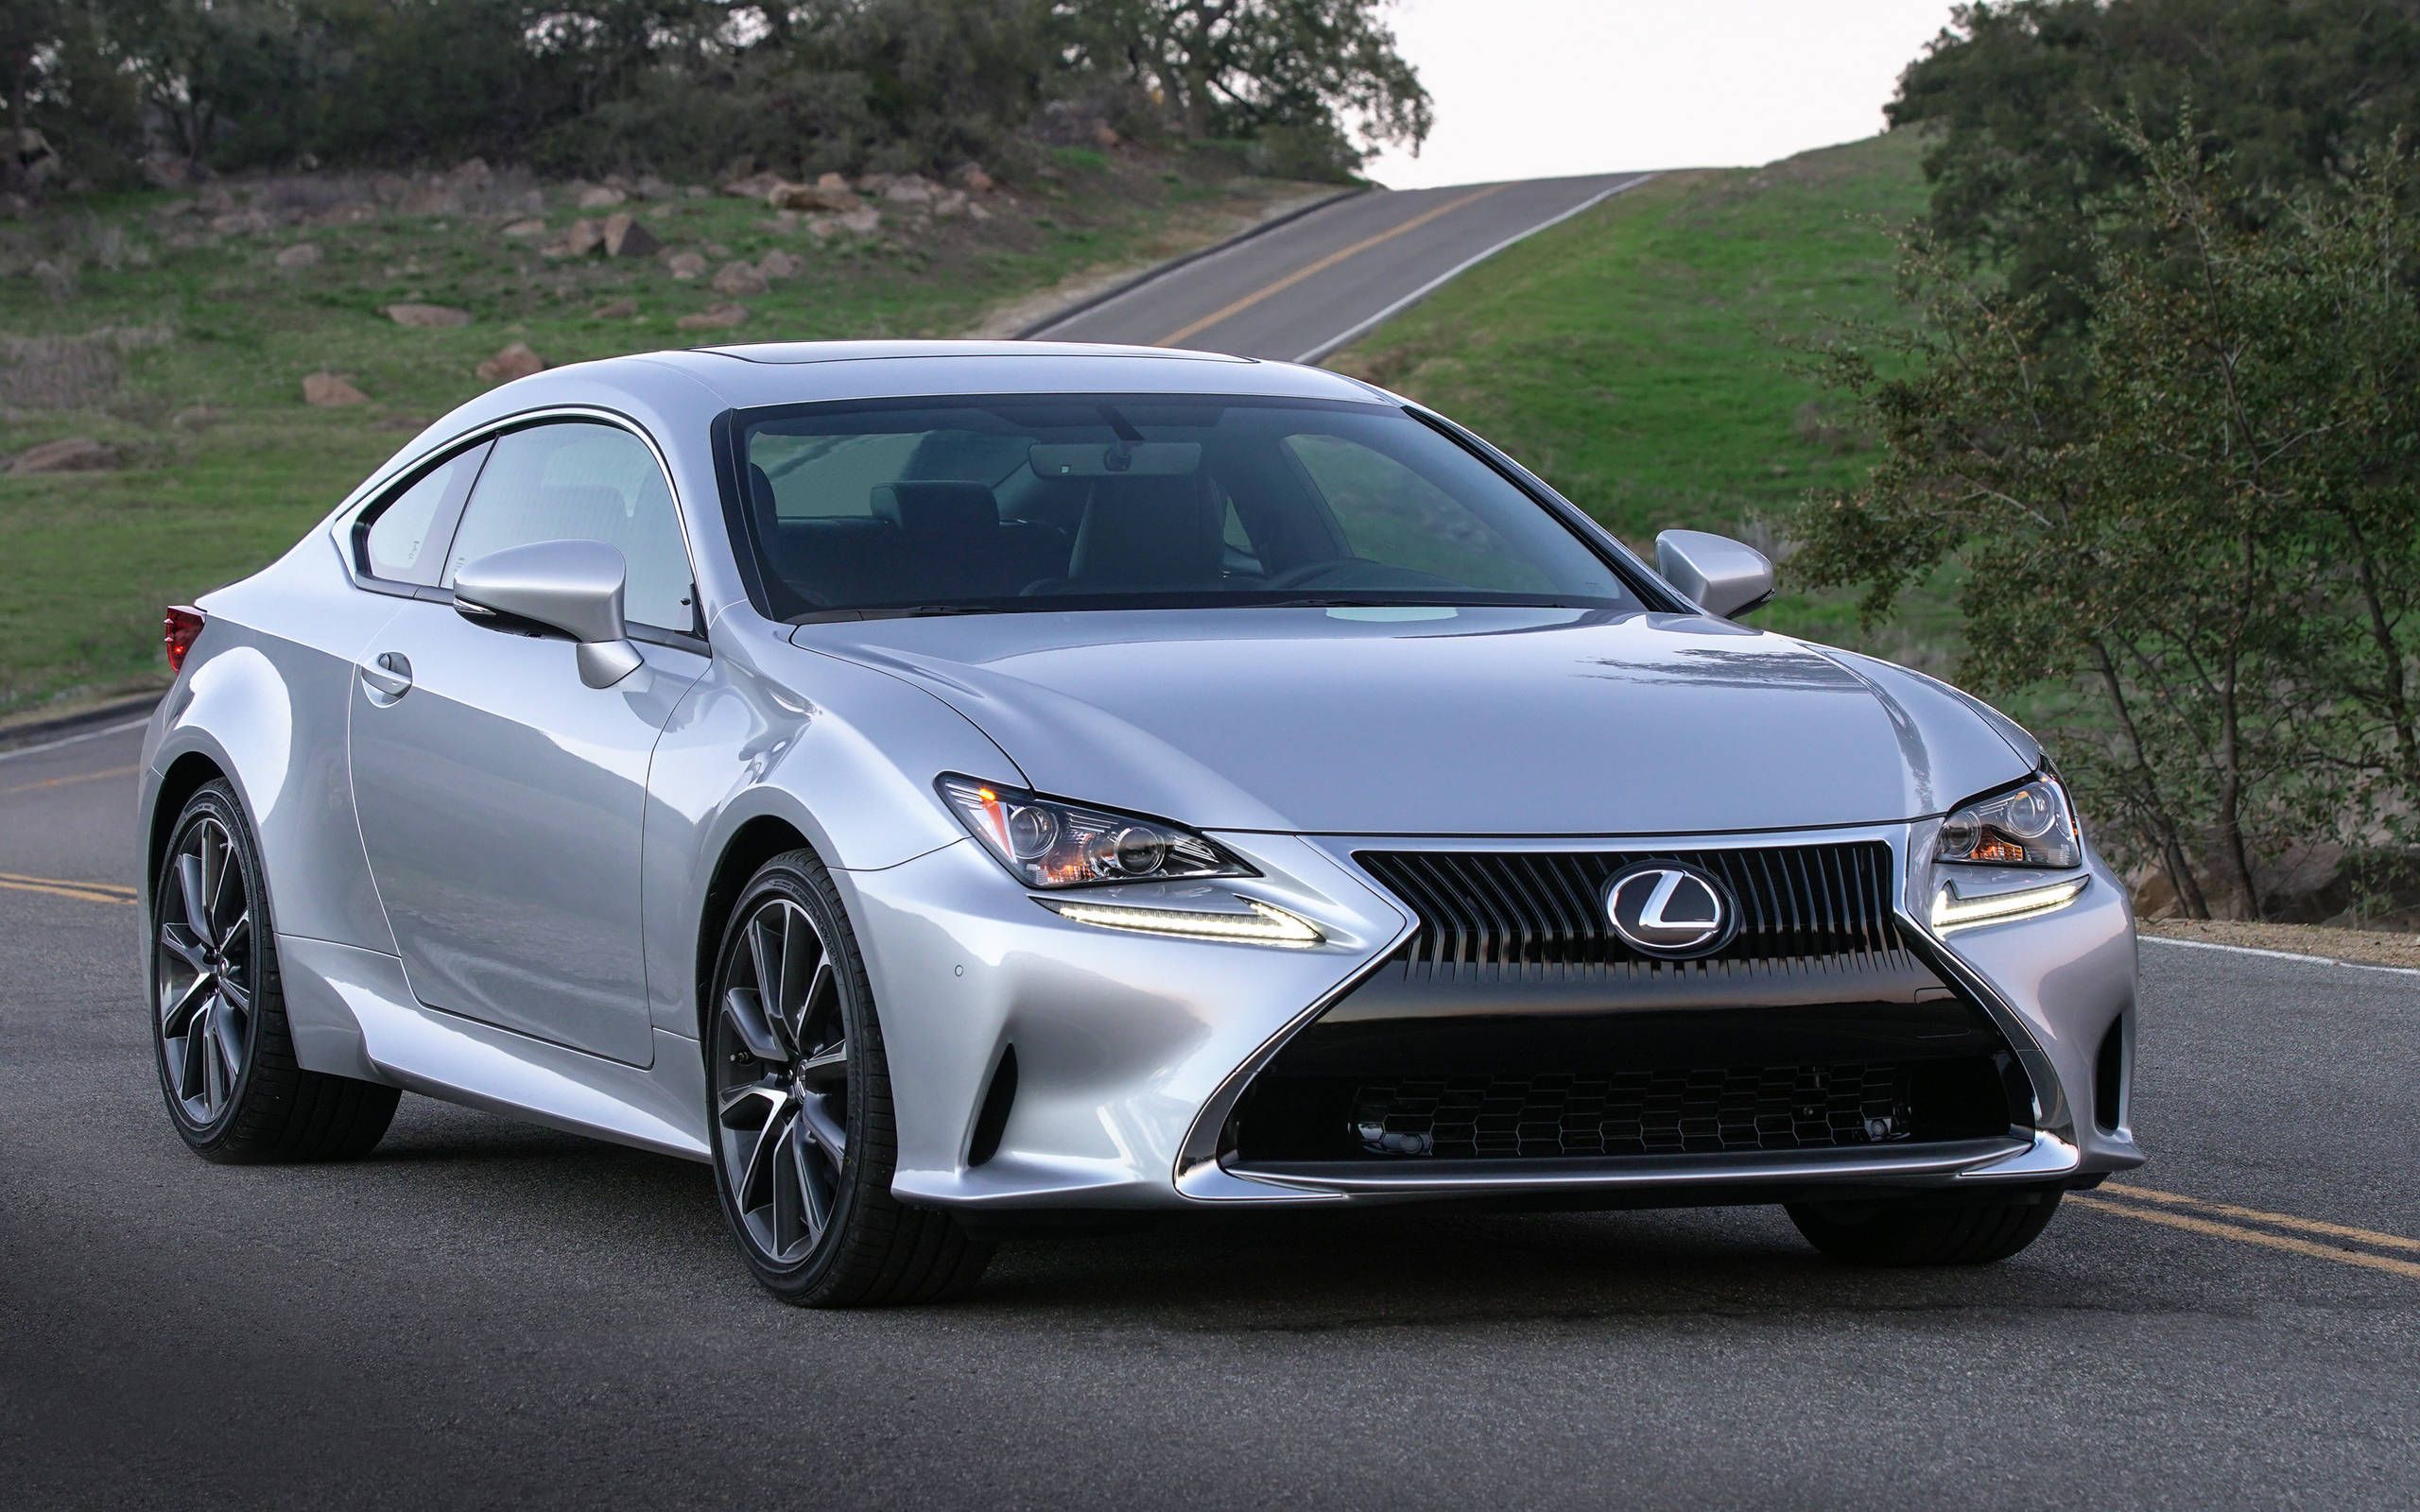 2017 Lexus RC200t review: When you want to look fast